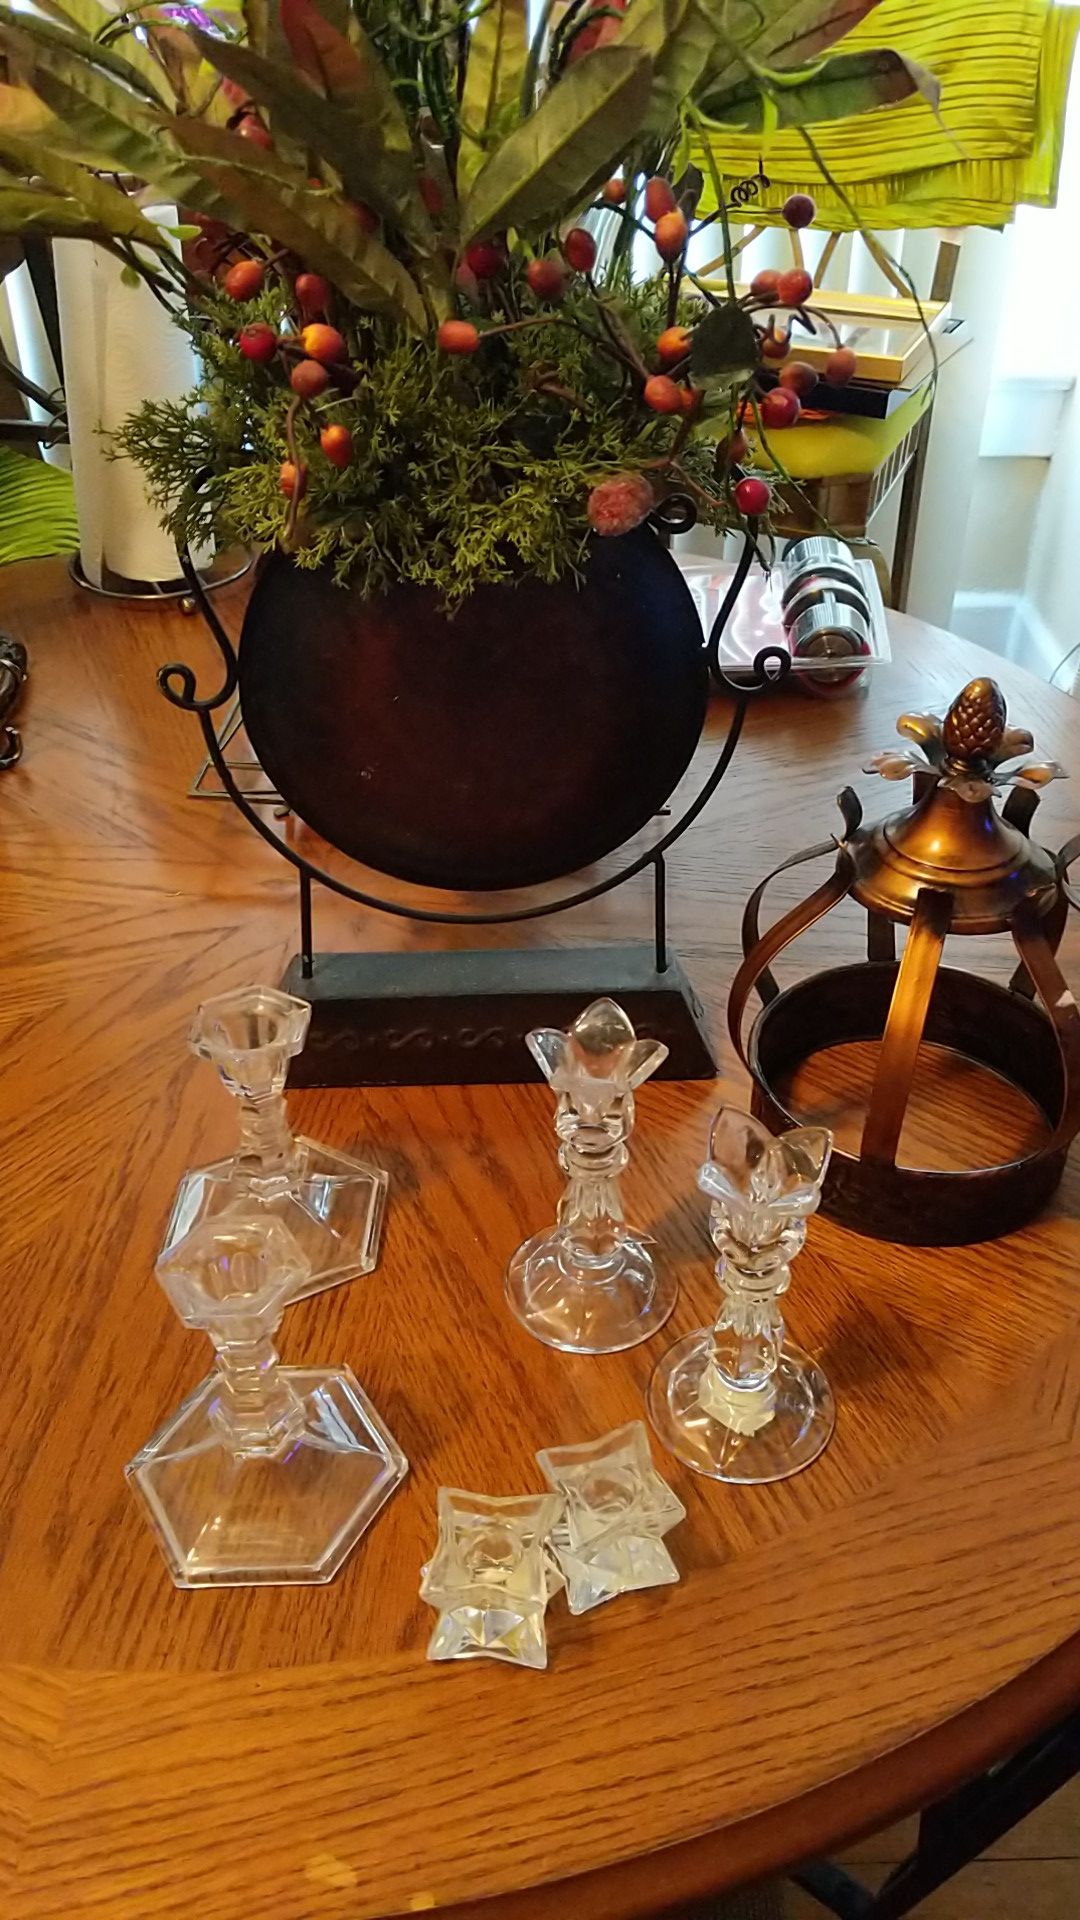 Candle holders, vase artificial Flowers Etc.